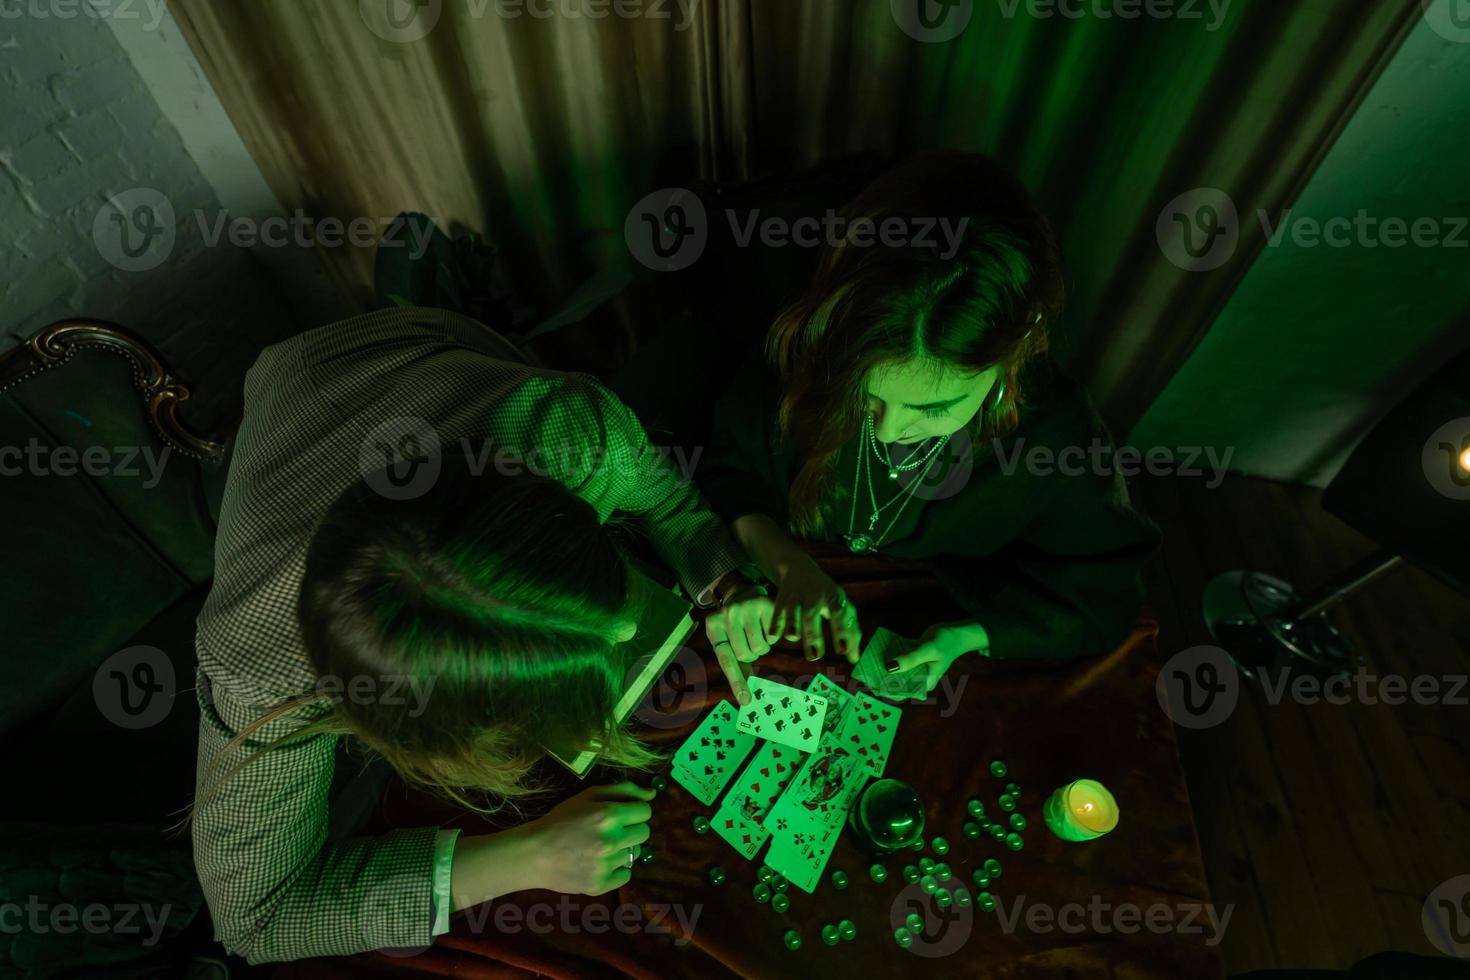 Fortune teller forecasting the future to woman with cards photo